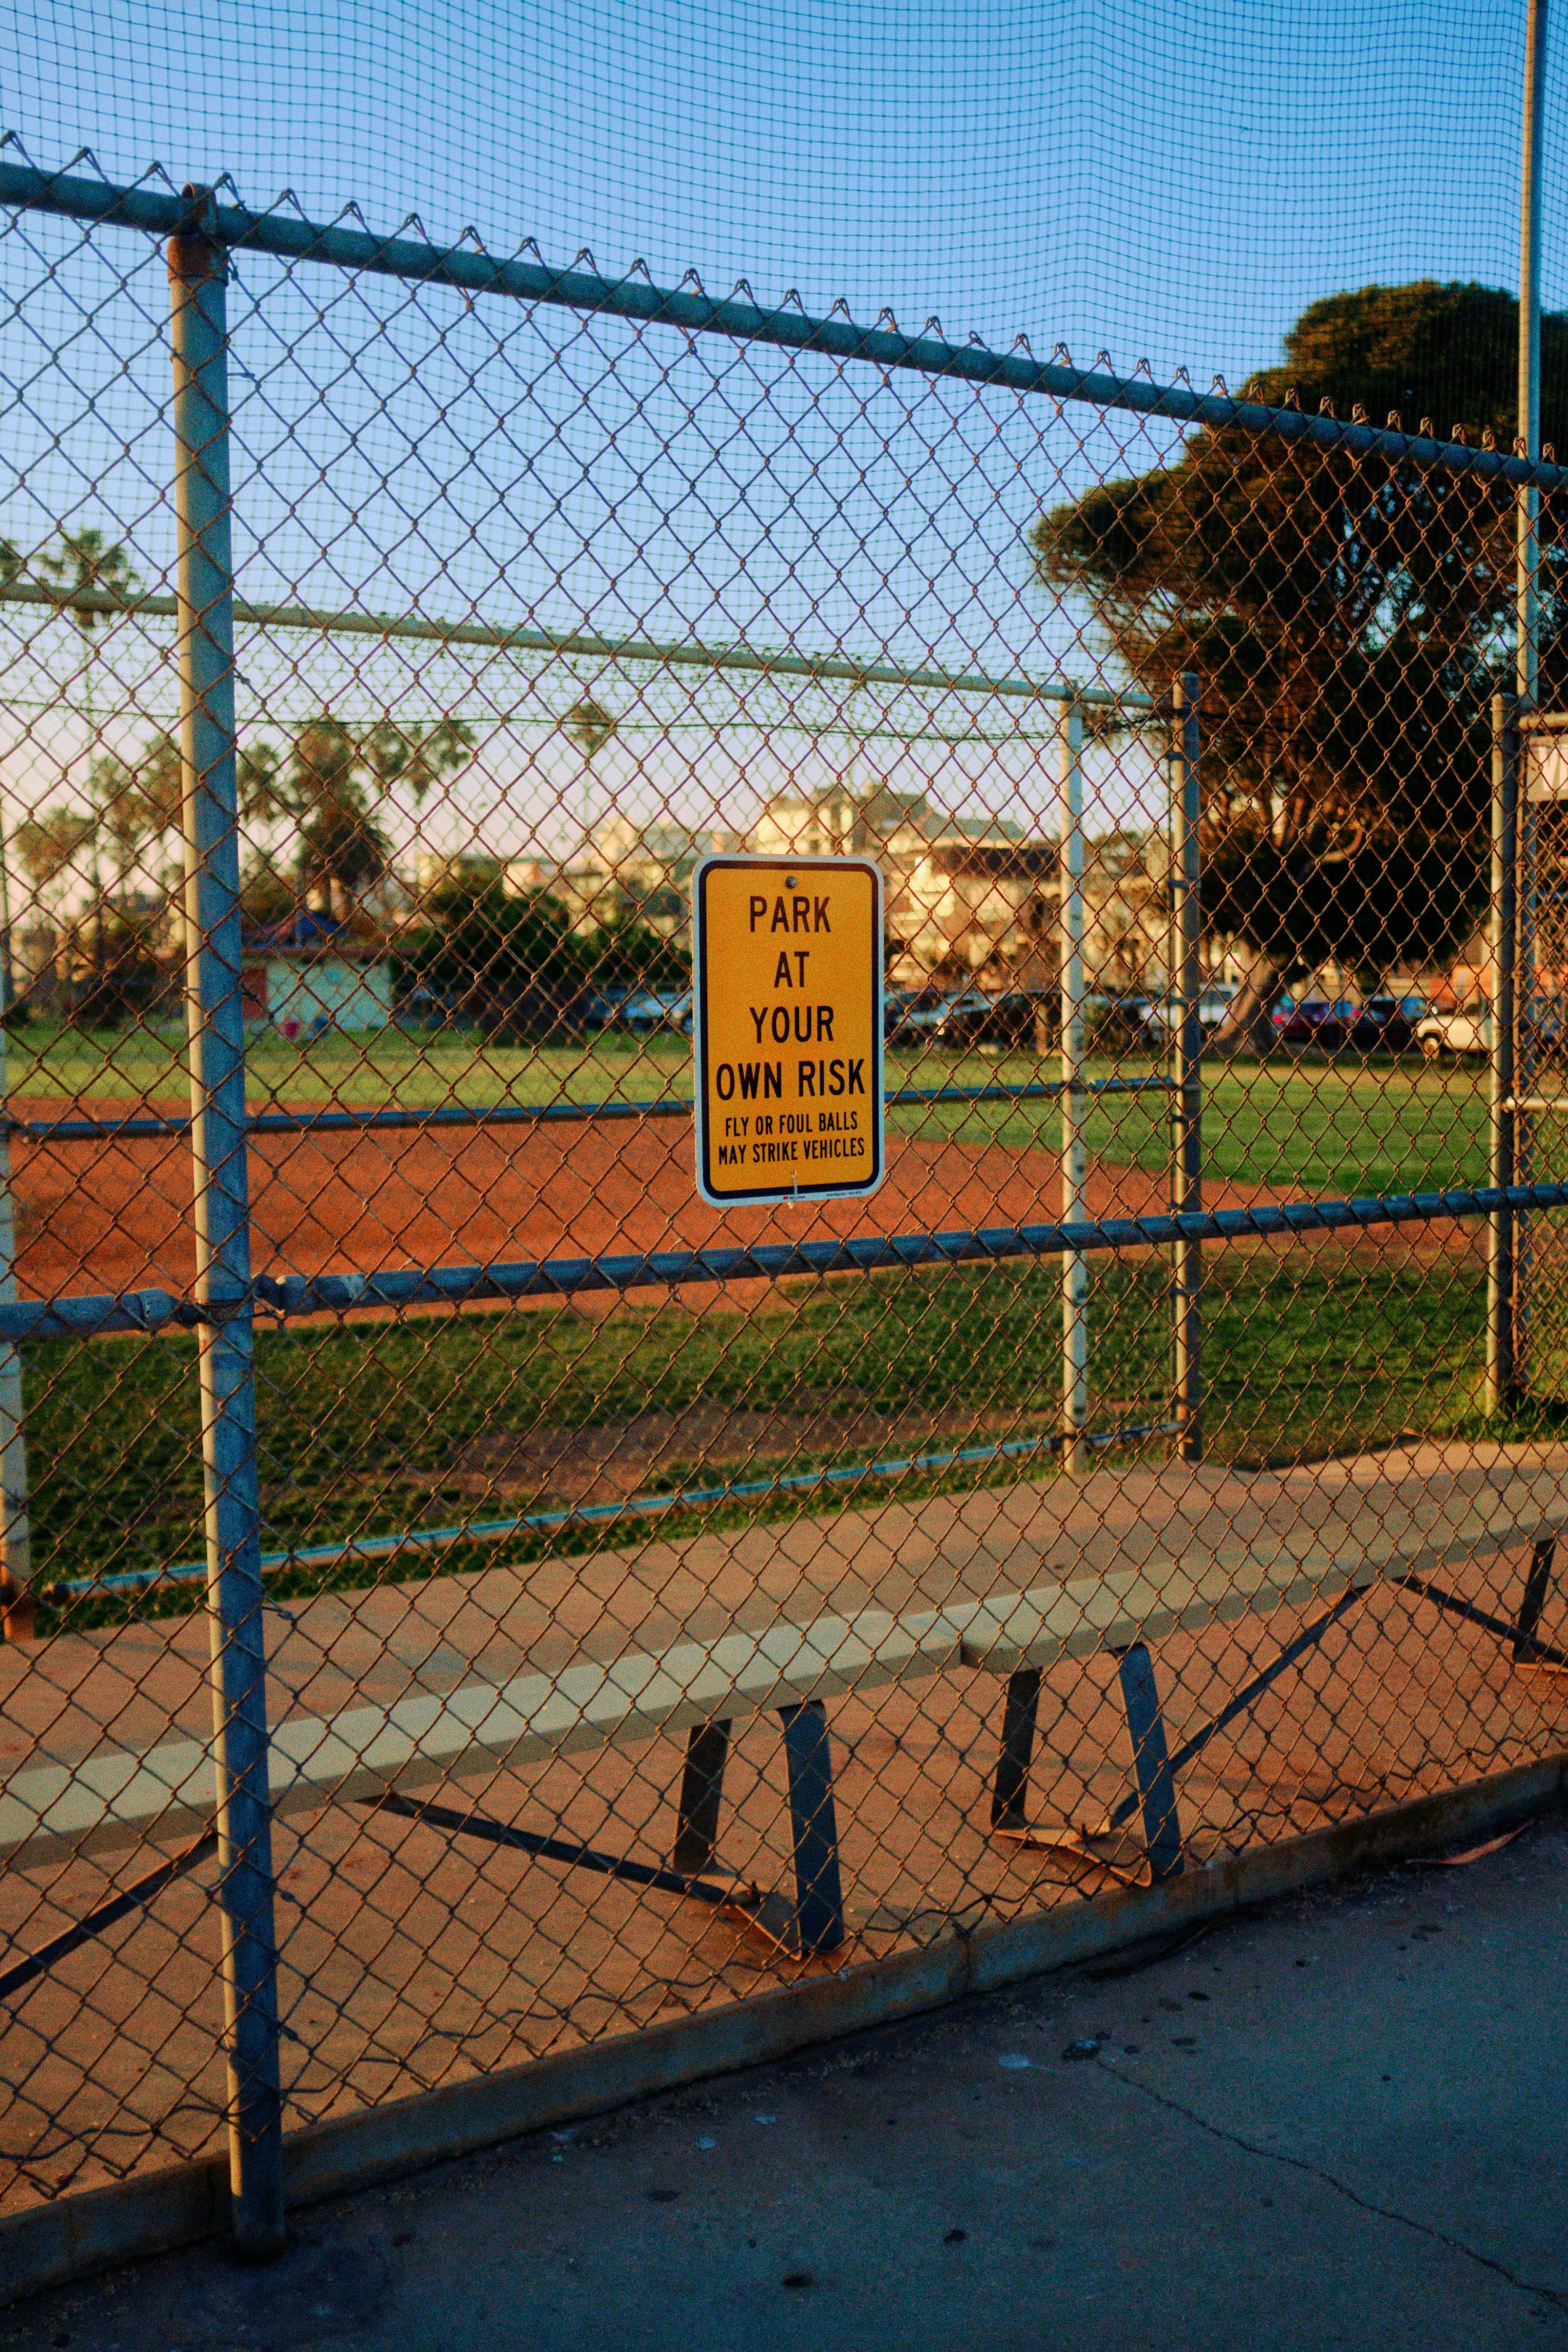 Caution sign on the fence of an empty public baseball pitch / field near Redondo Beach in Los Angeles, California.